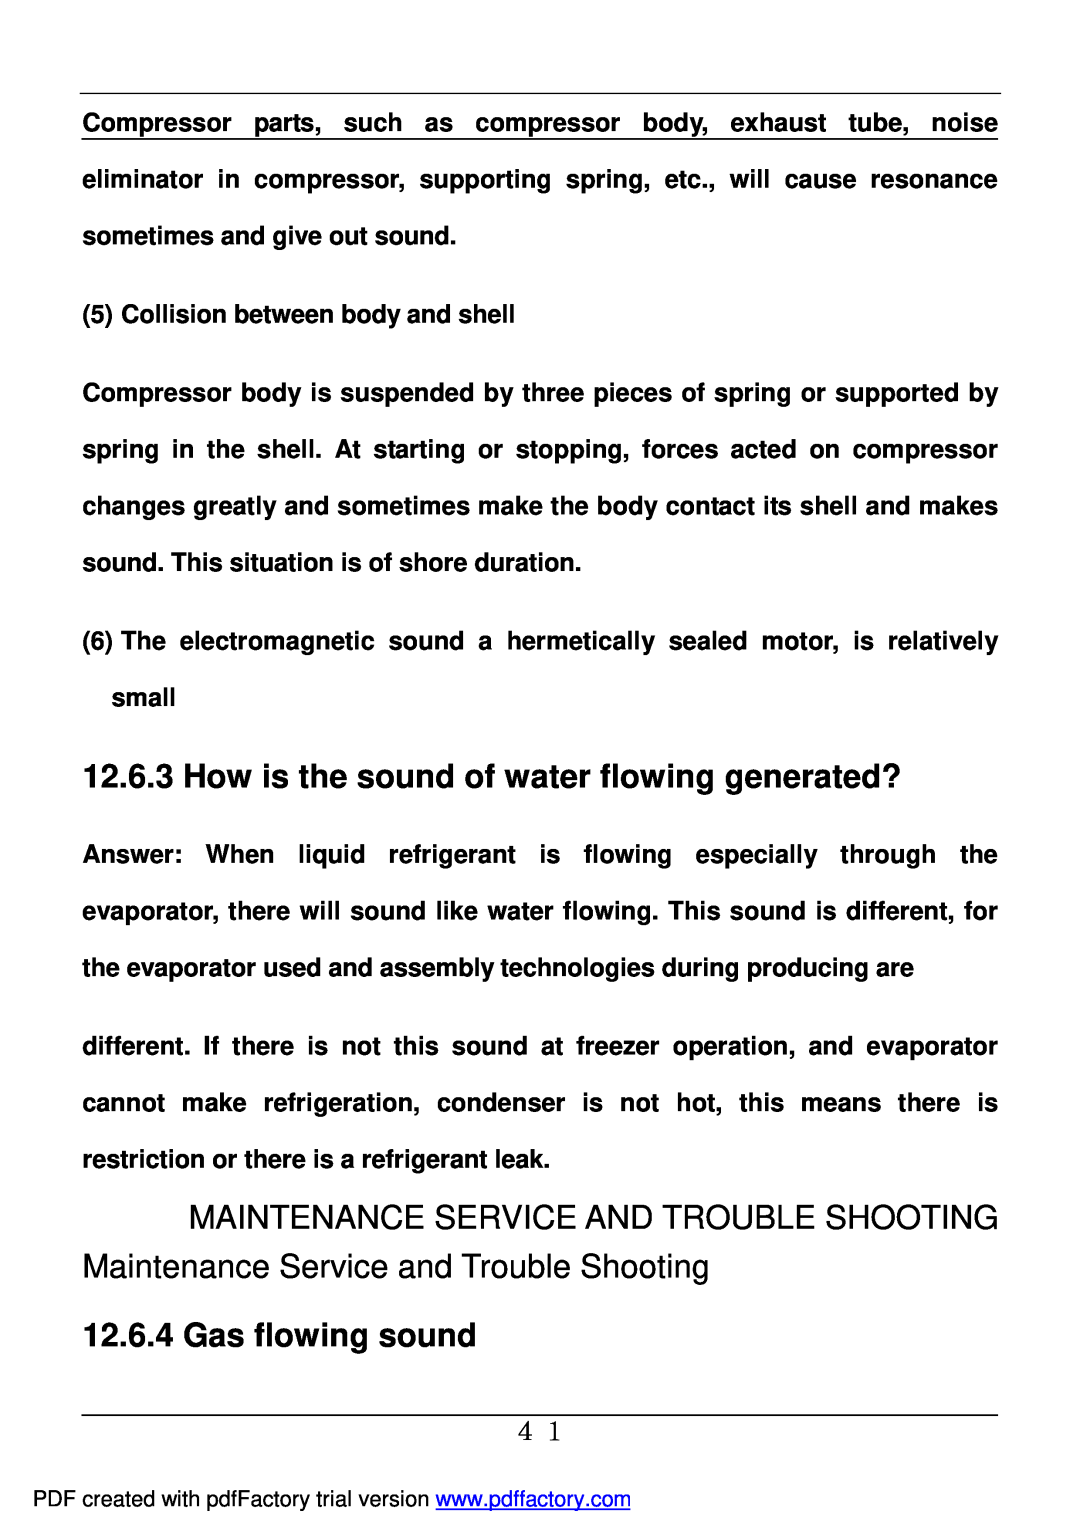 Haier BD-478A service manual How is the sound of water flowing generated?, Gas flowing sound 